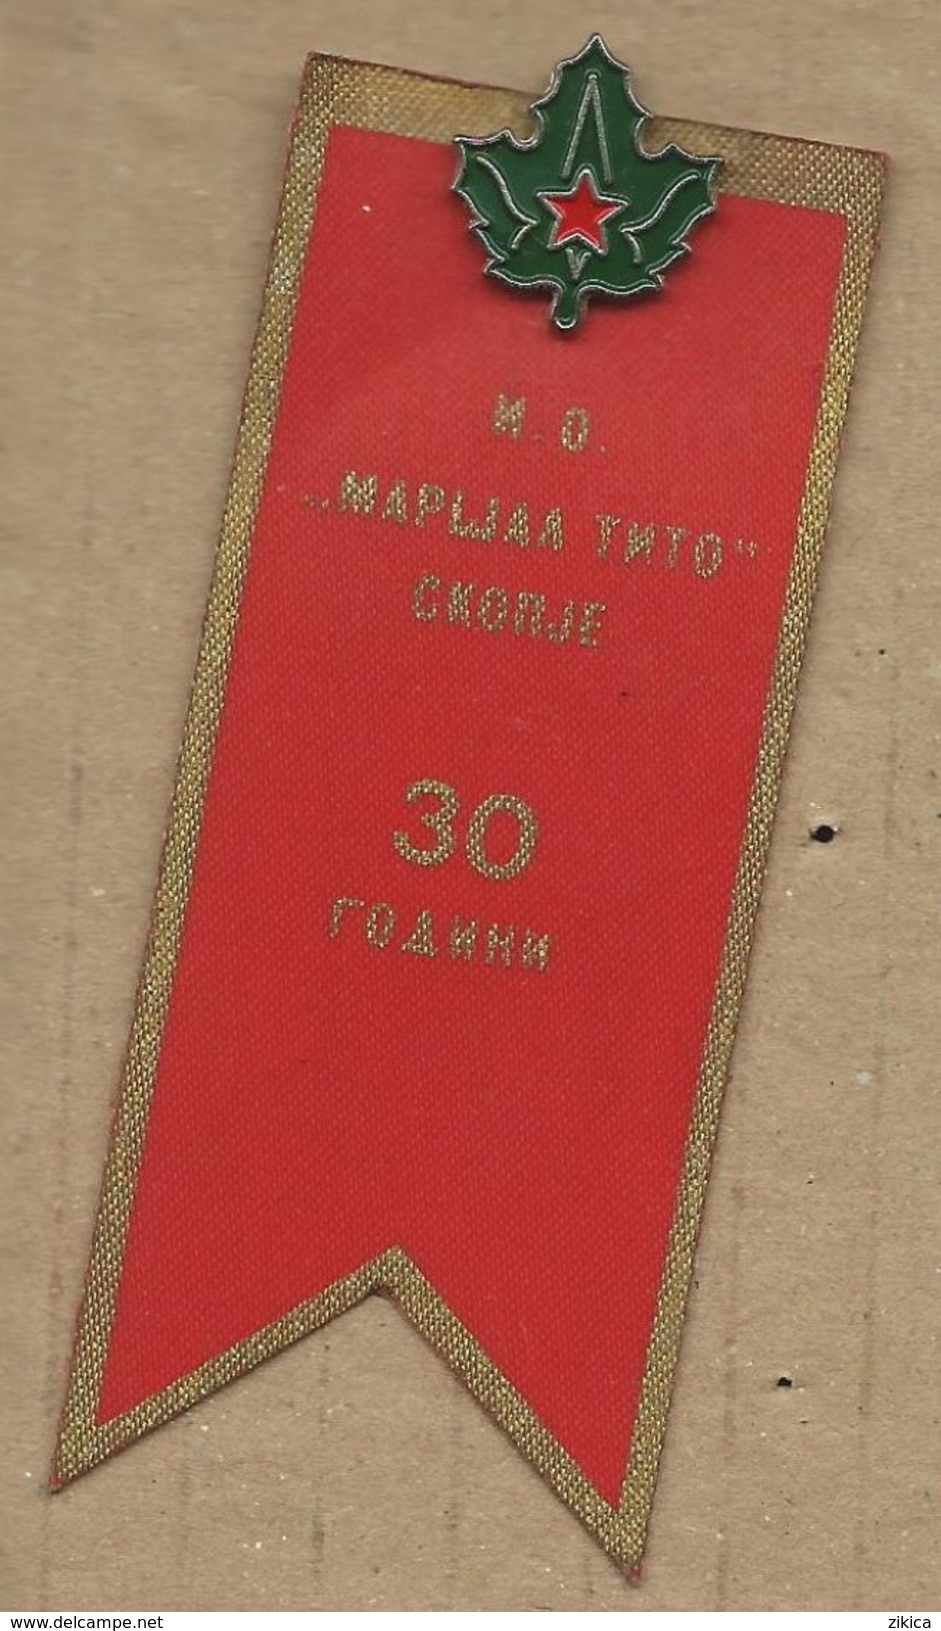 Scouting Scoutisme Boy Scout.Scout Association-,,Marshal Tito" Skopje Macedonia. Jubilee Pin And Small Flag - Associazioni